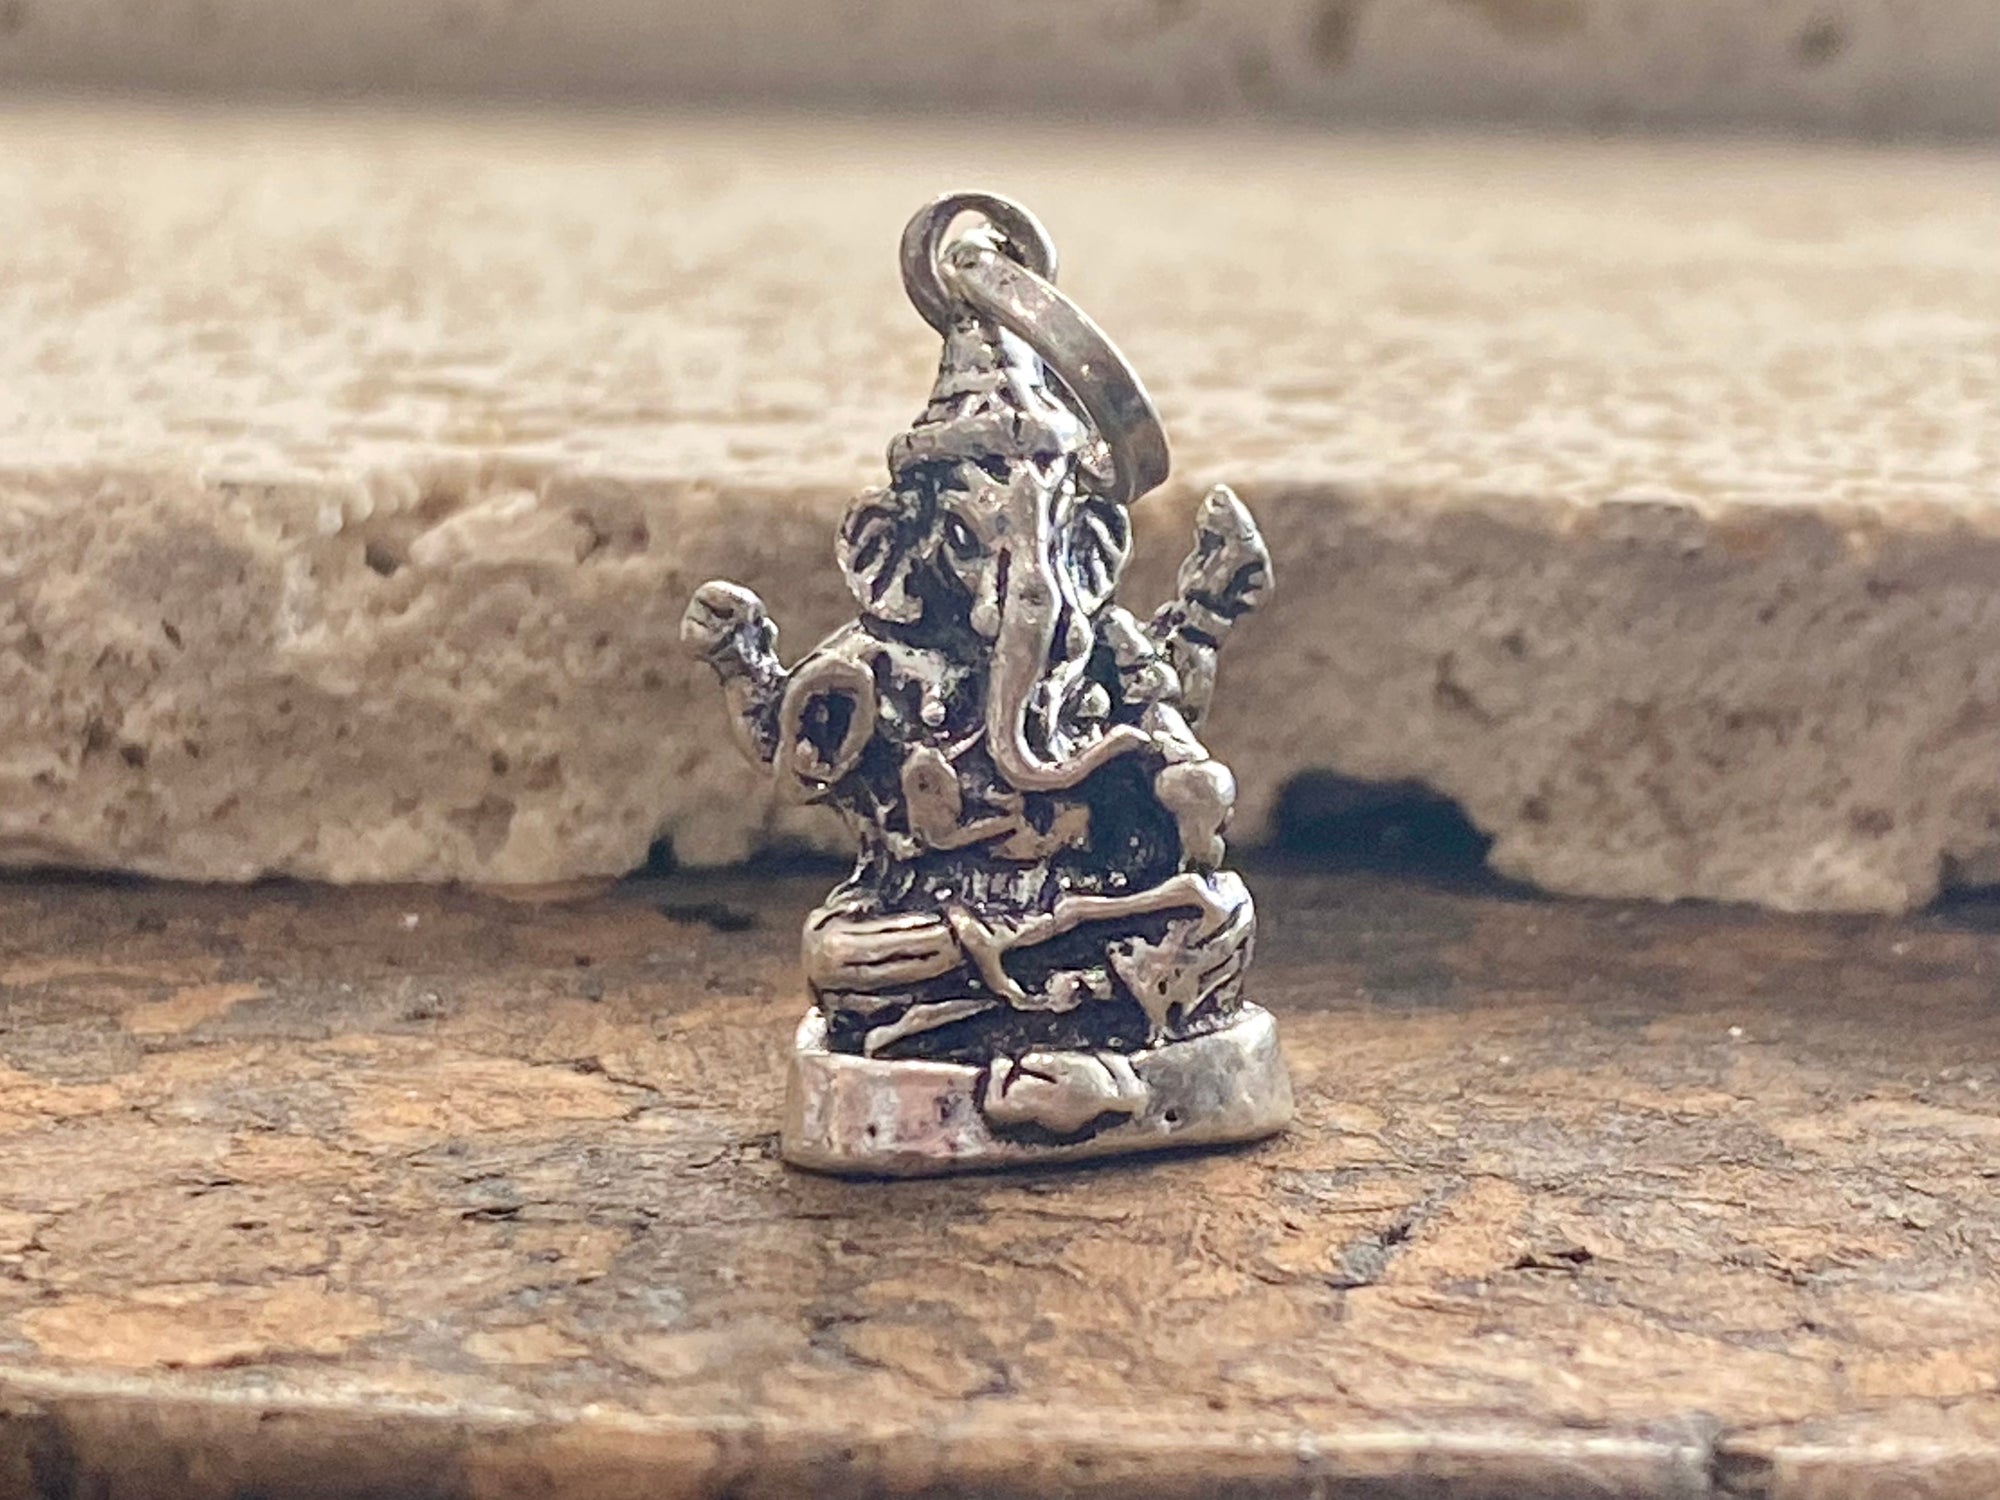 Sterling silver pendant featuring Lord Ganesha portrayed in 3D, this heavy silver charm pendant can be viewed in 3 dimensions, with his back as complete and as detailed as his front. A generous bail allows this pendant to be worn on a large chain or cord. he can even sit upright as the smallest of ganesh statues. This is a unisex pendant or statue. Sterling silver. Measurements: 3 cm height including bail